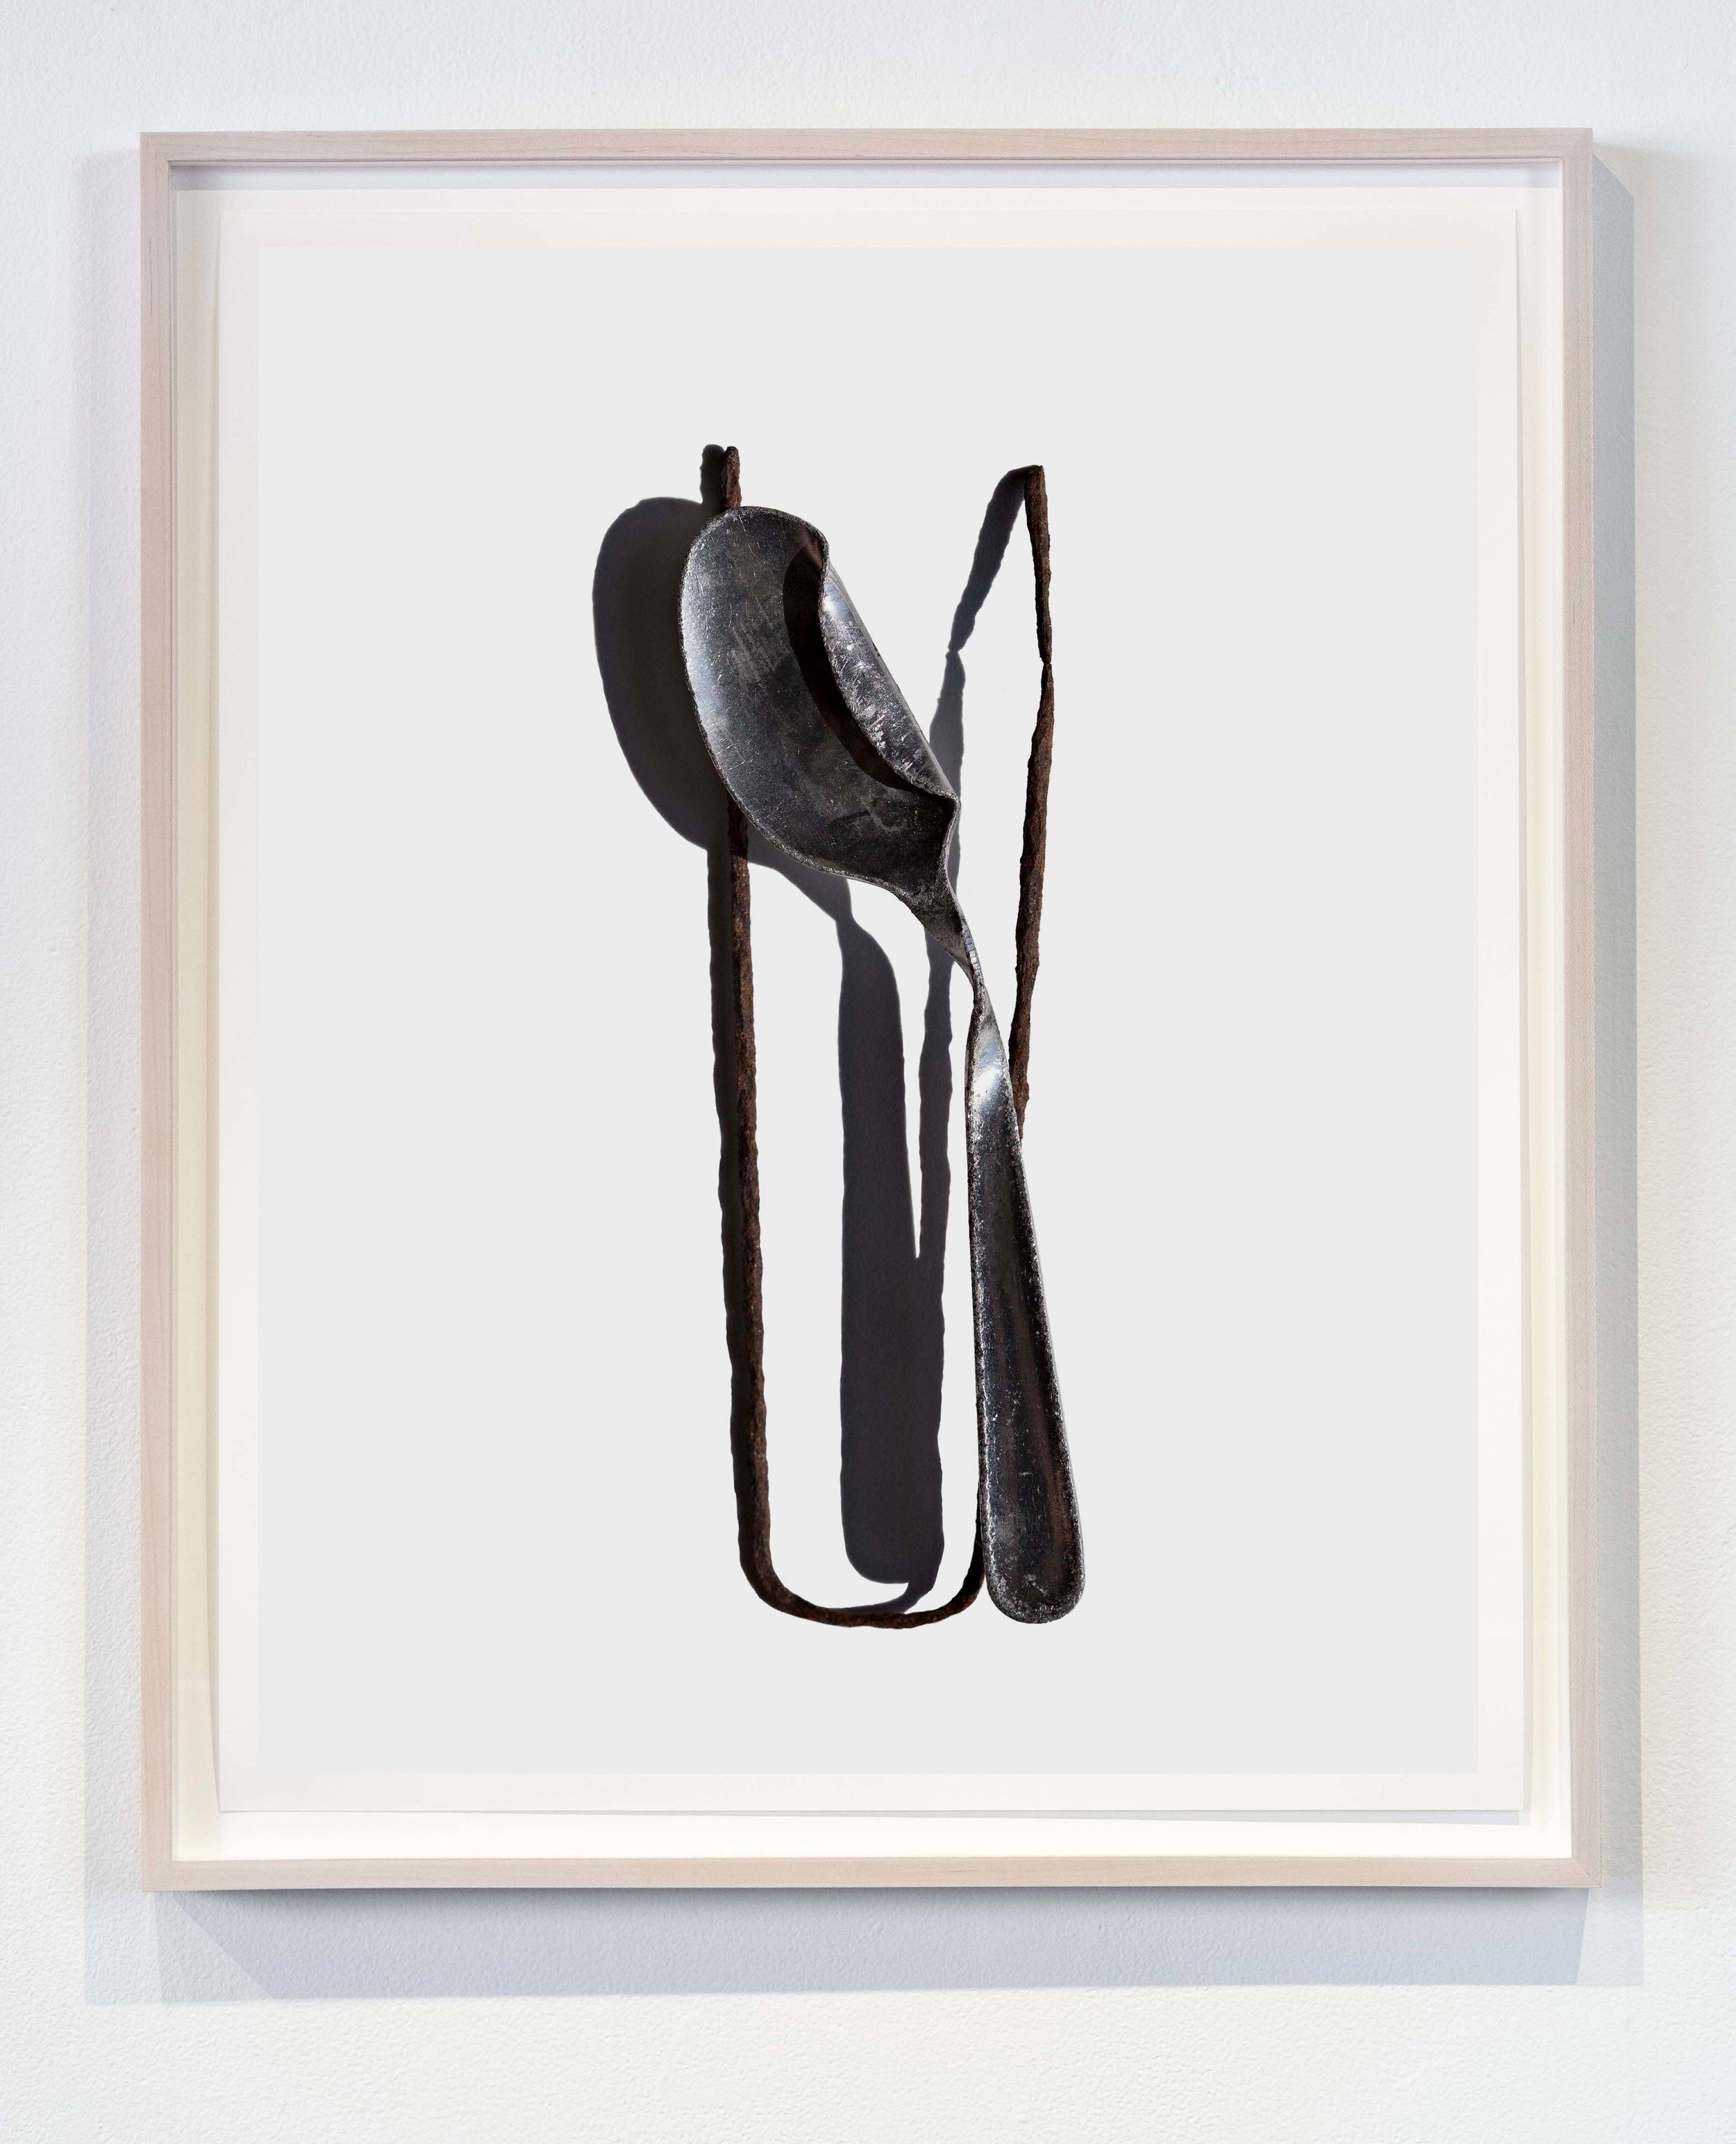  Twisted Spoon and Metal  archival pigment print 20x25 inches 